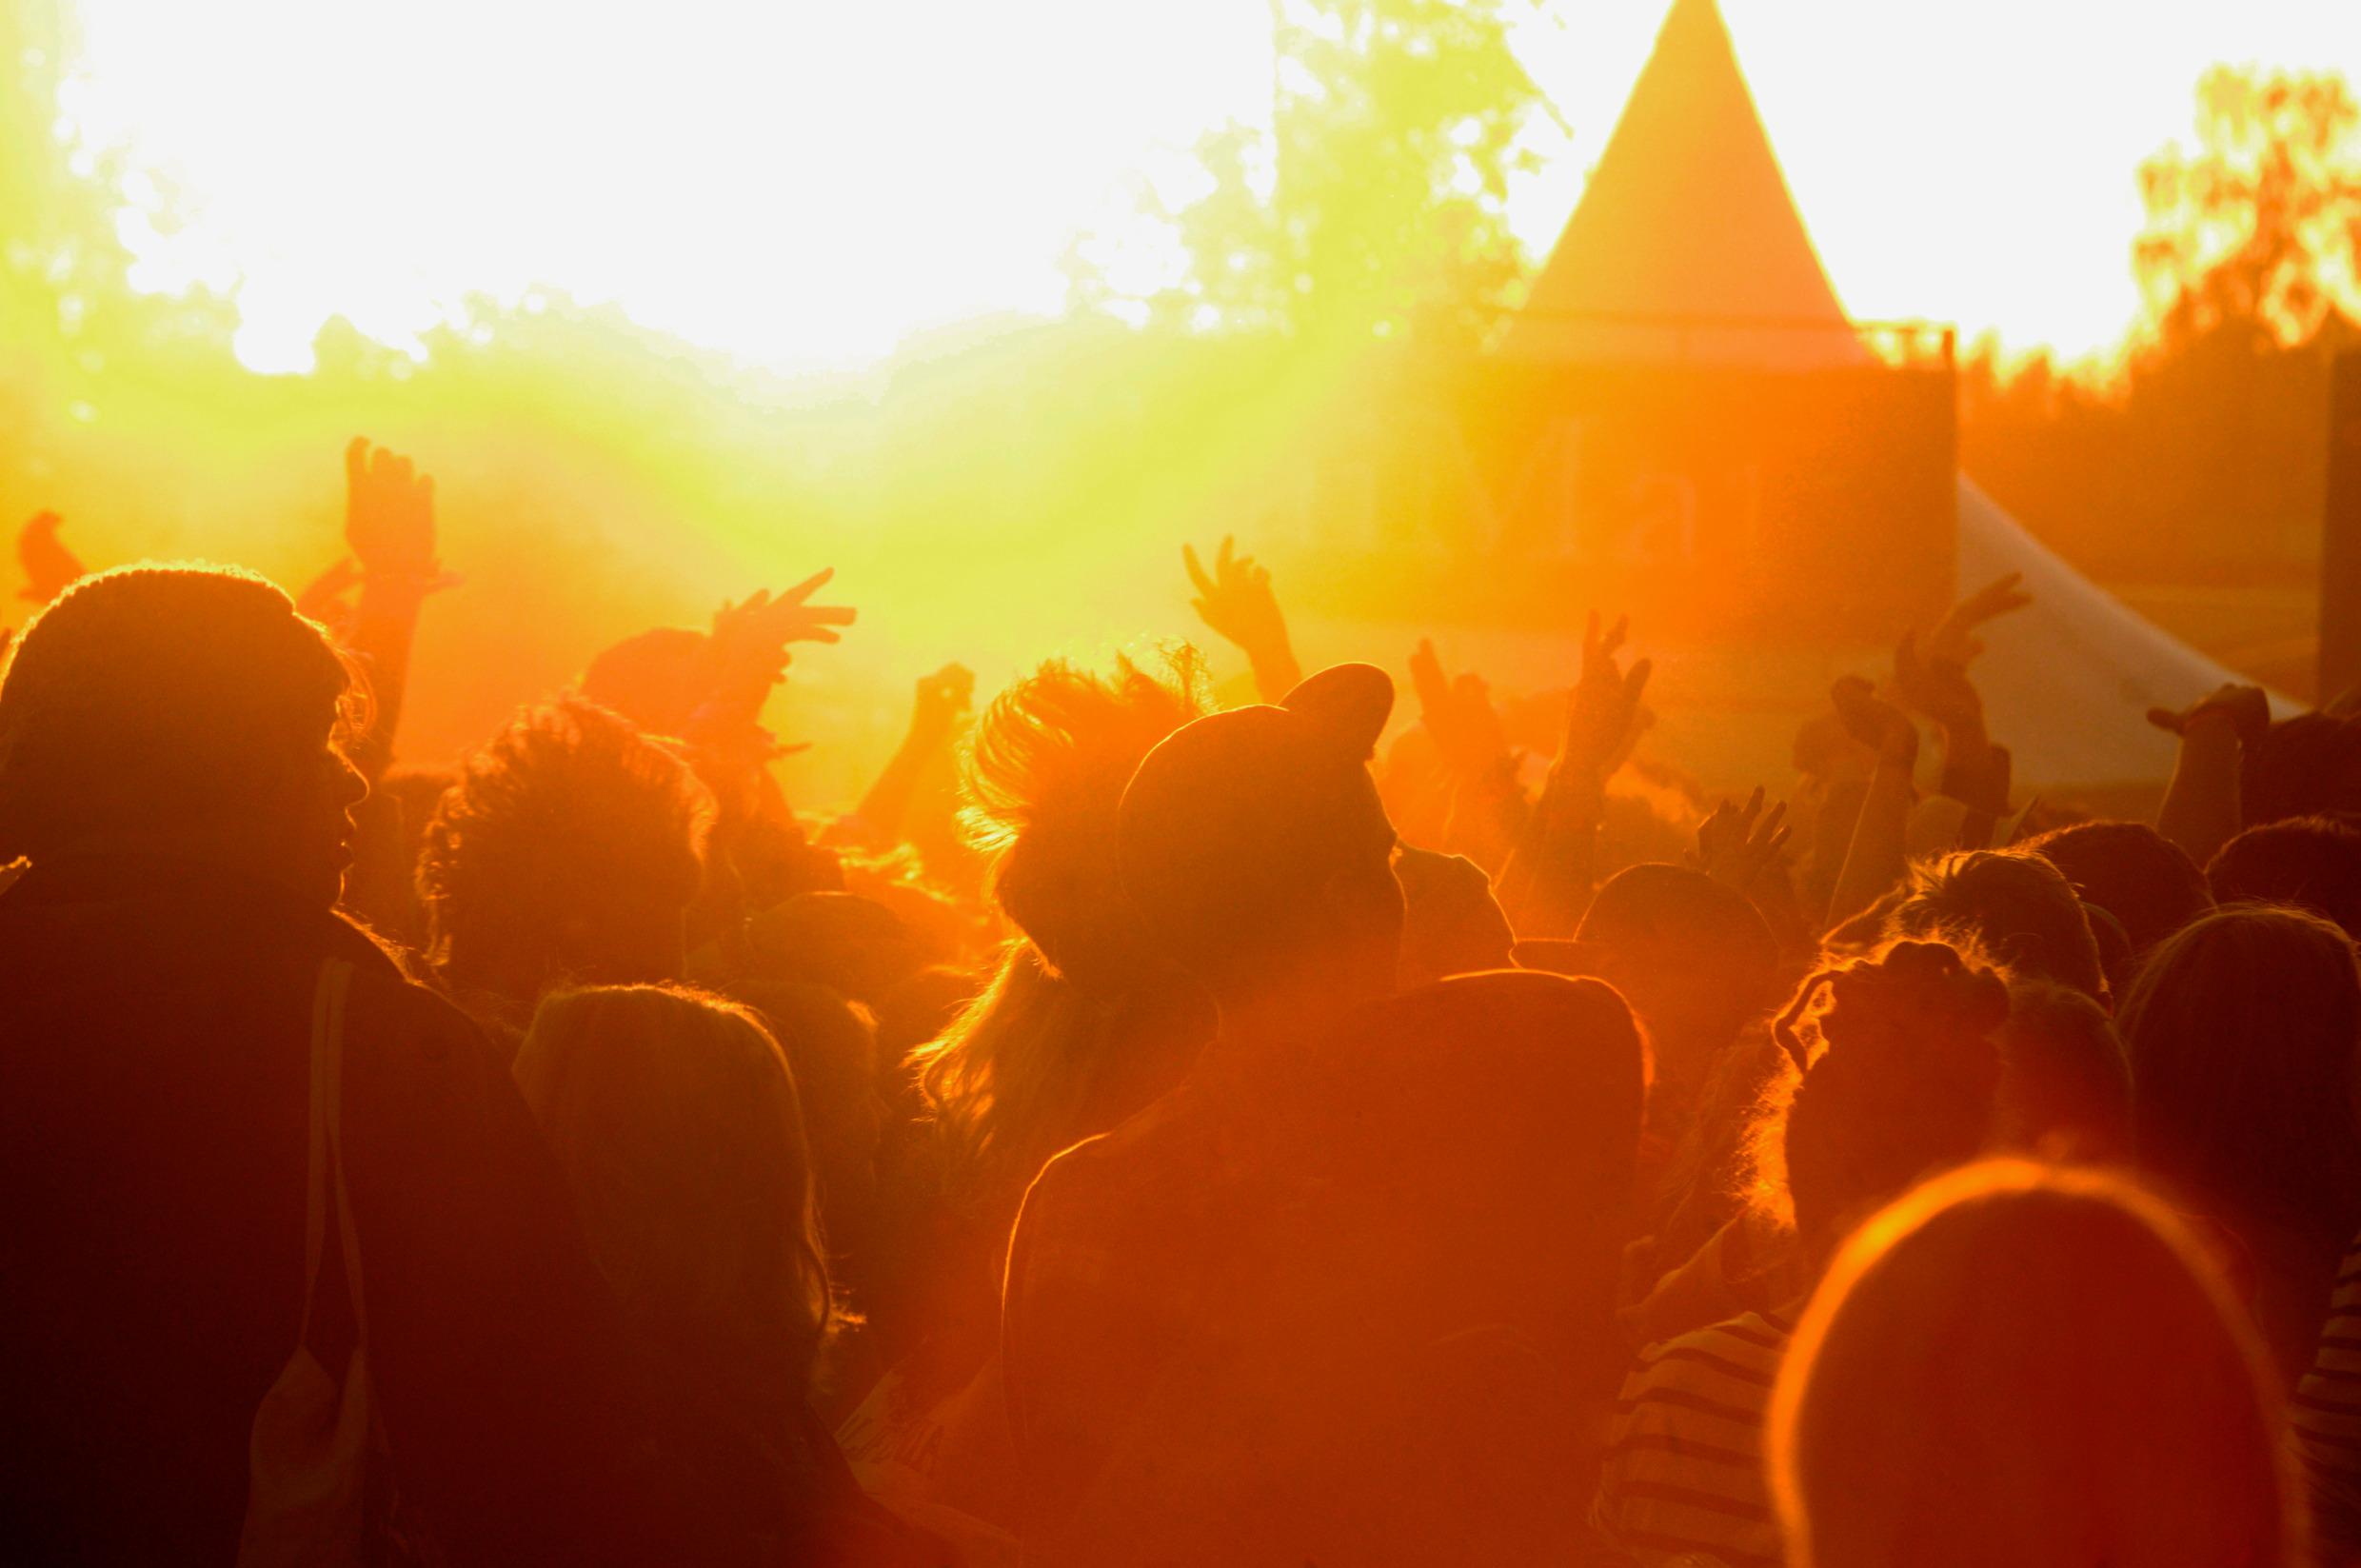 Sunset at a music festival